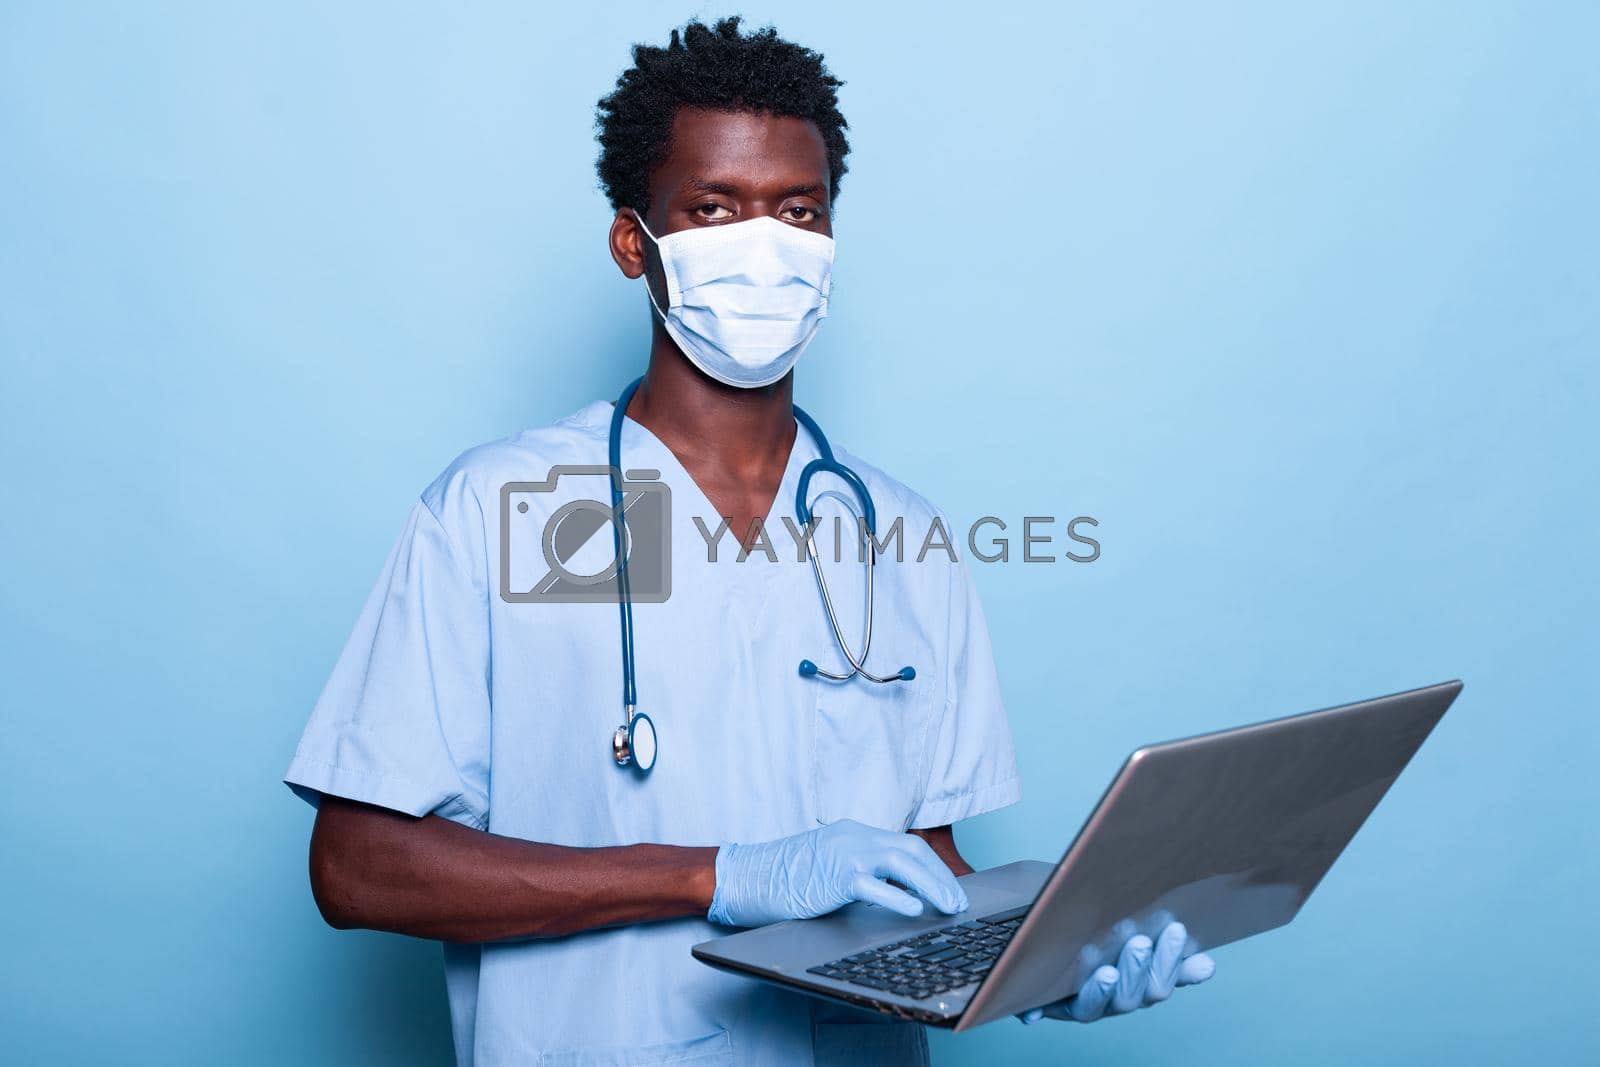 Healthcare assistant with laptop in hand wearing face mask. Medical nurse with uniform and gloves for coronavirus pandemic protection holding device. Specialist with stethoscope